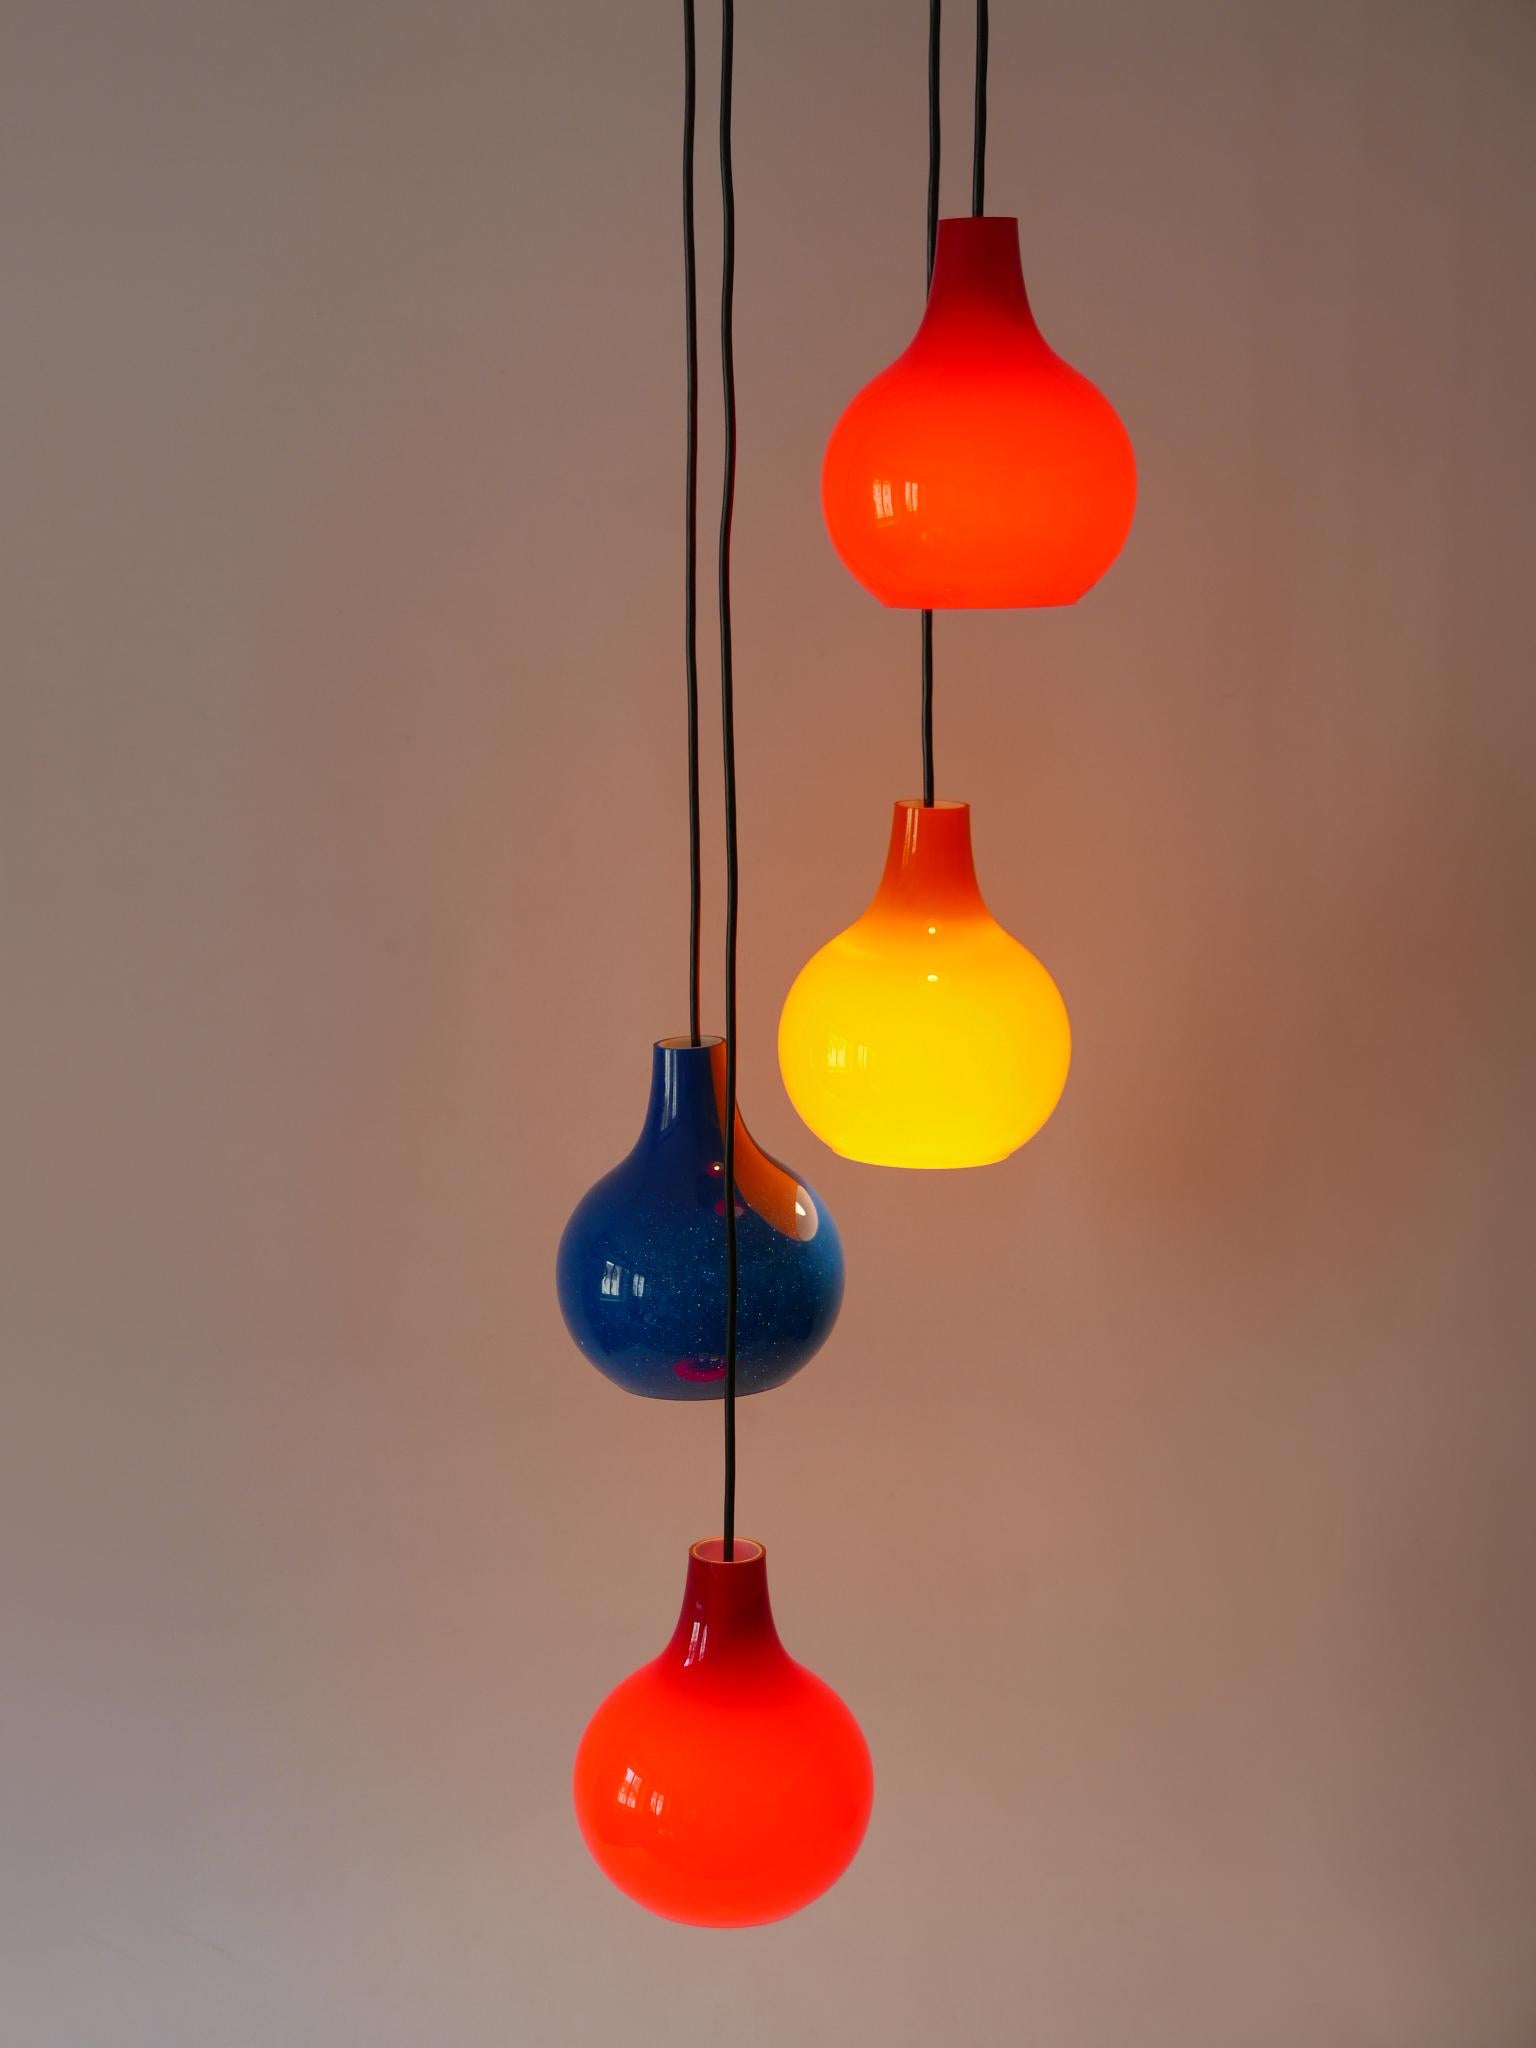 A breath taking light object. Extremely rare, lovely and highly decorative Mid-Century Modern four-flamed cascading pendant lamp or chandelier. Designed and manufactured by Peill & Putzler, Germany, 1970s.

Executed in red, blue and orange colored